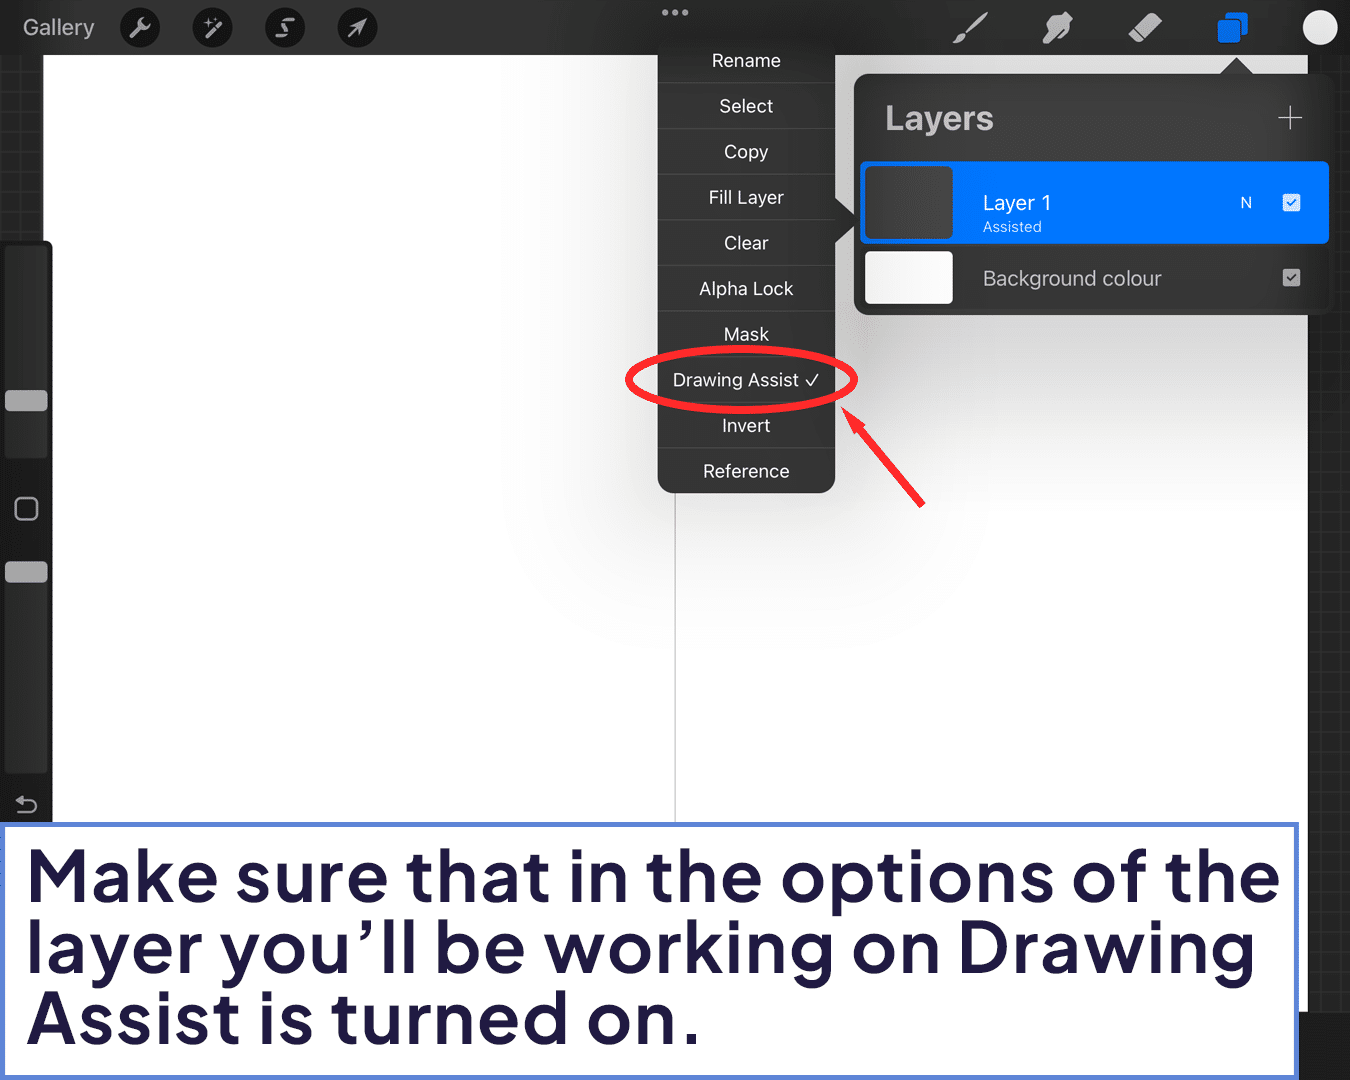 How to Draw a Perfect Symmetrical Star in Procreate